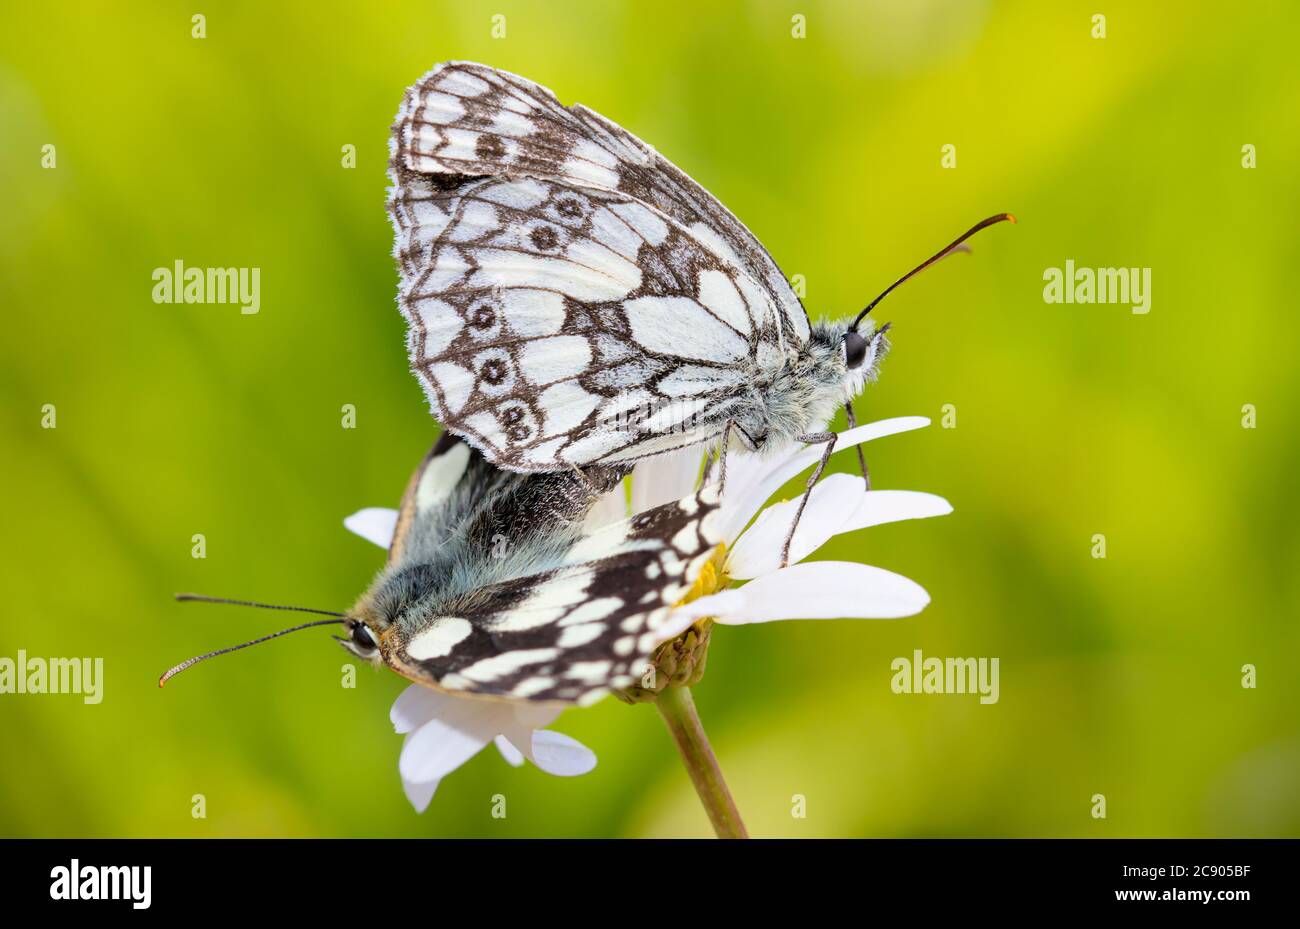 Pair Of Marbled White Butterflies, Melanargia galathea Mating On Top Of A Daisy Flower On A Diffuse Green Background. Taken at Longham Lakes UK Stock Photo